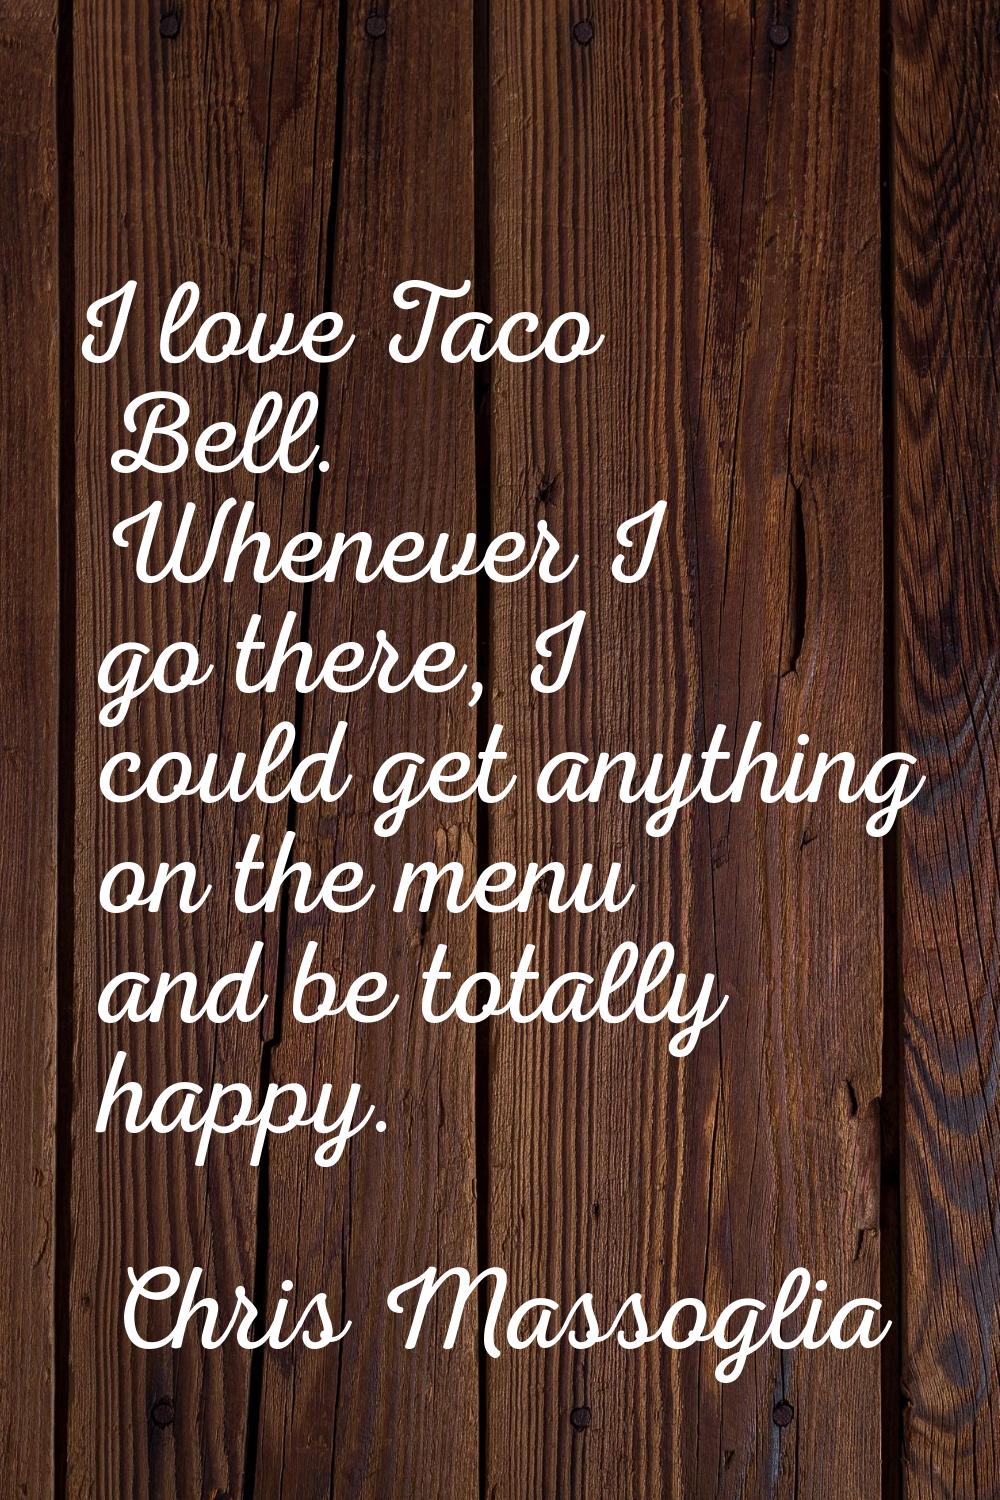 I love Taco Bell. Whenever I go there, I could get anything on the menu and be totally happy.